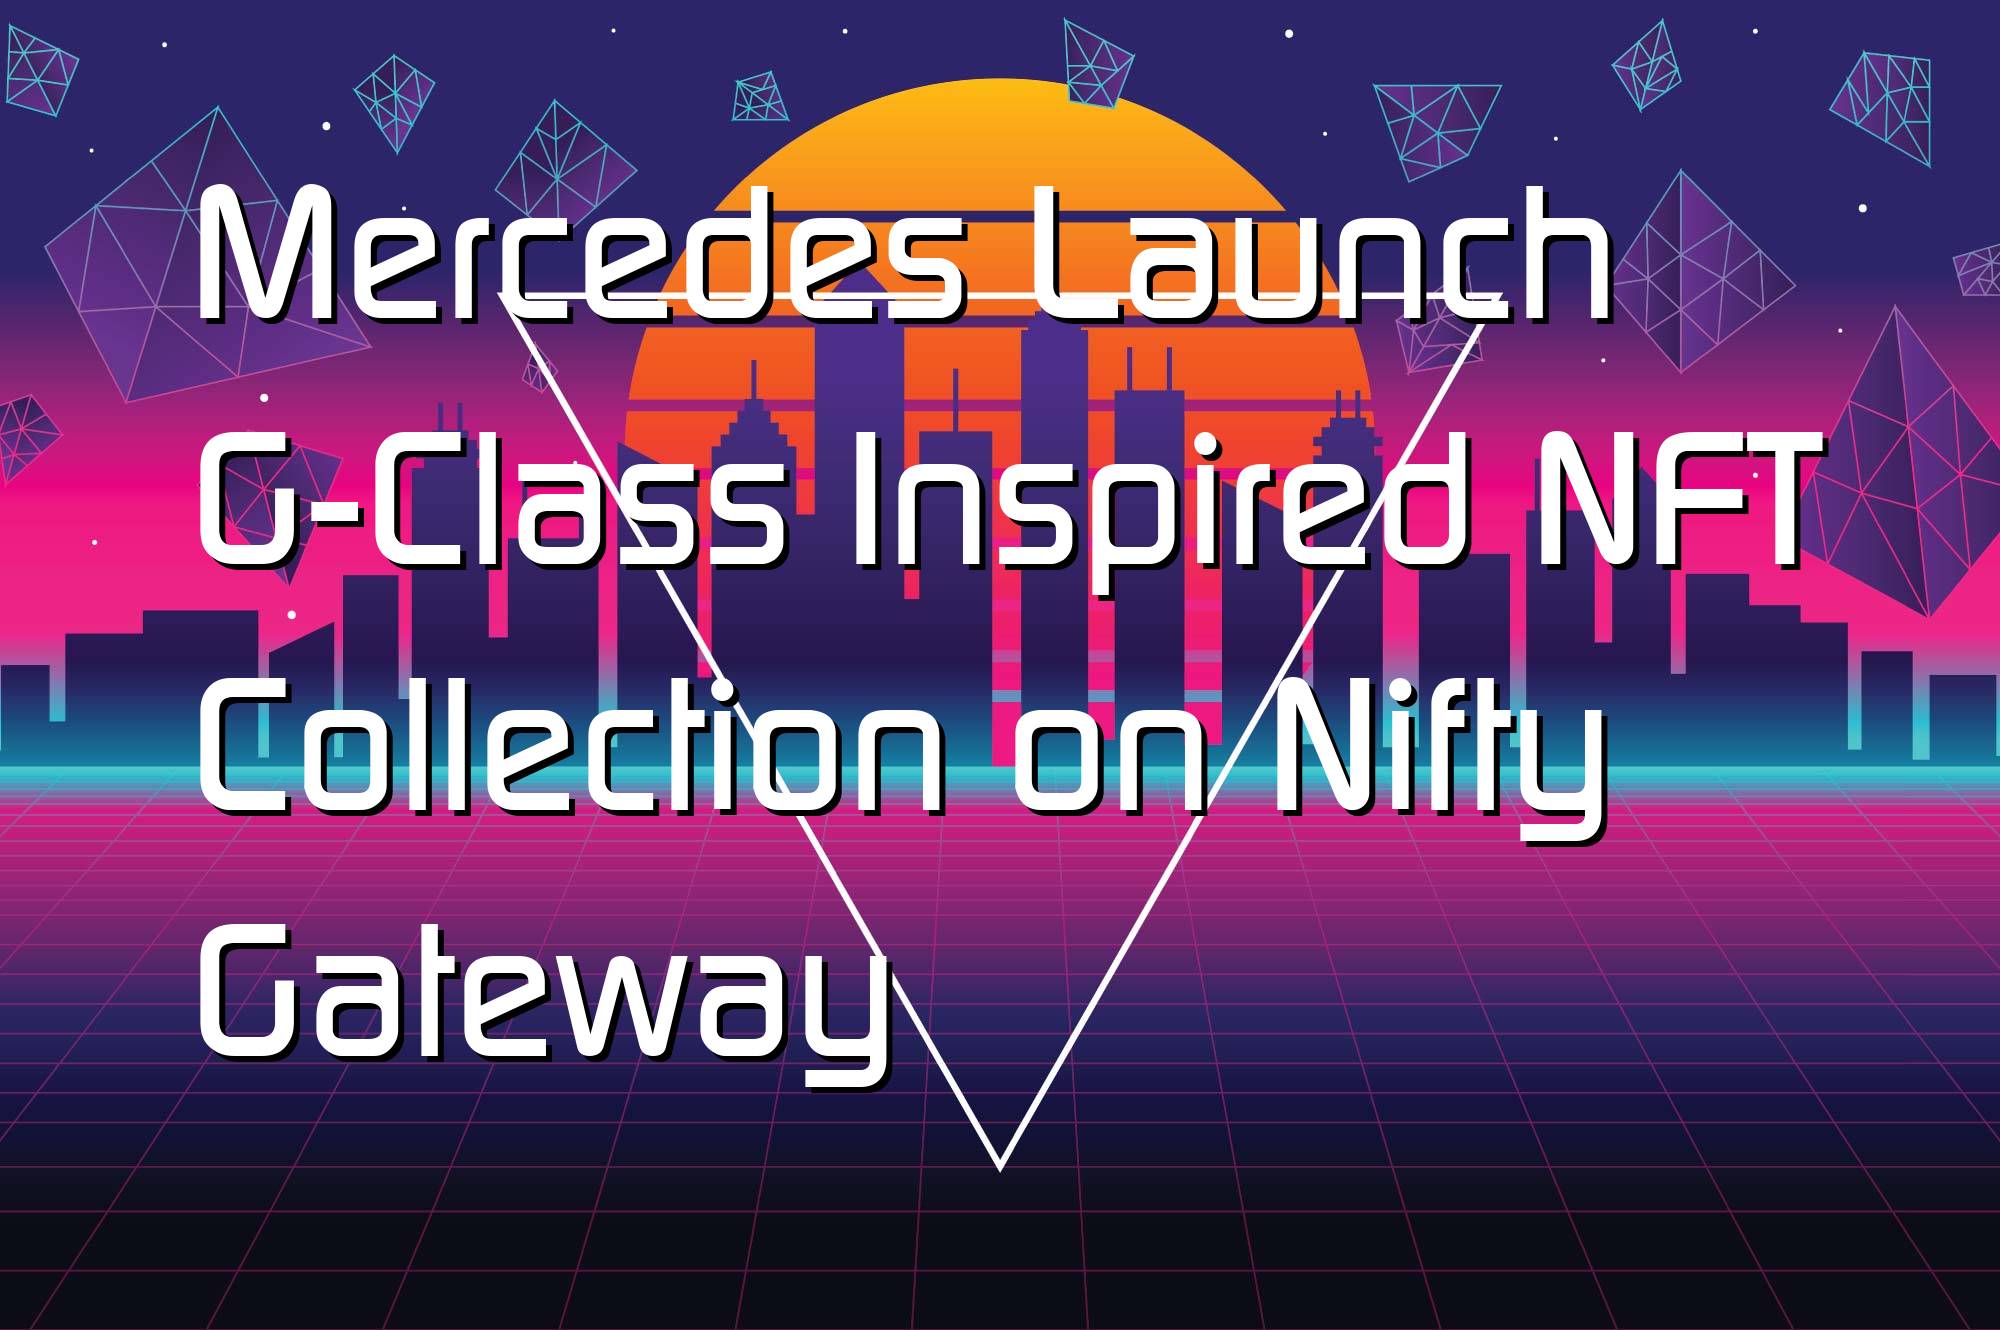 @$35236: Mercedes Launch G-Class Inspired NFT Collection on Nifty Gateway